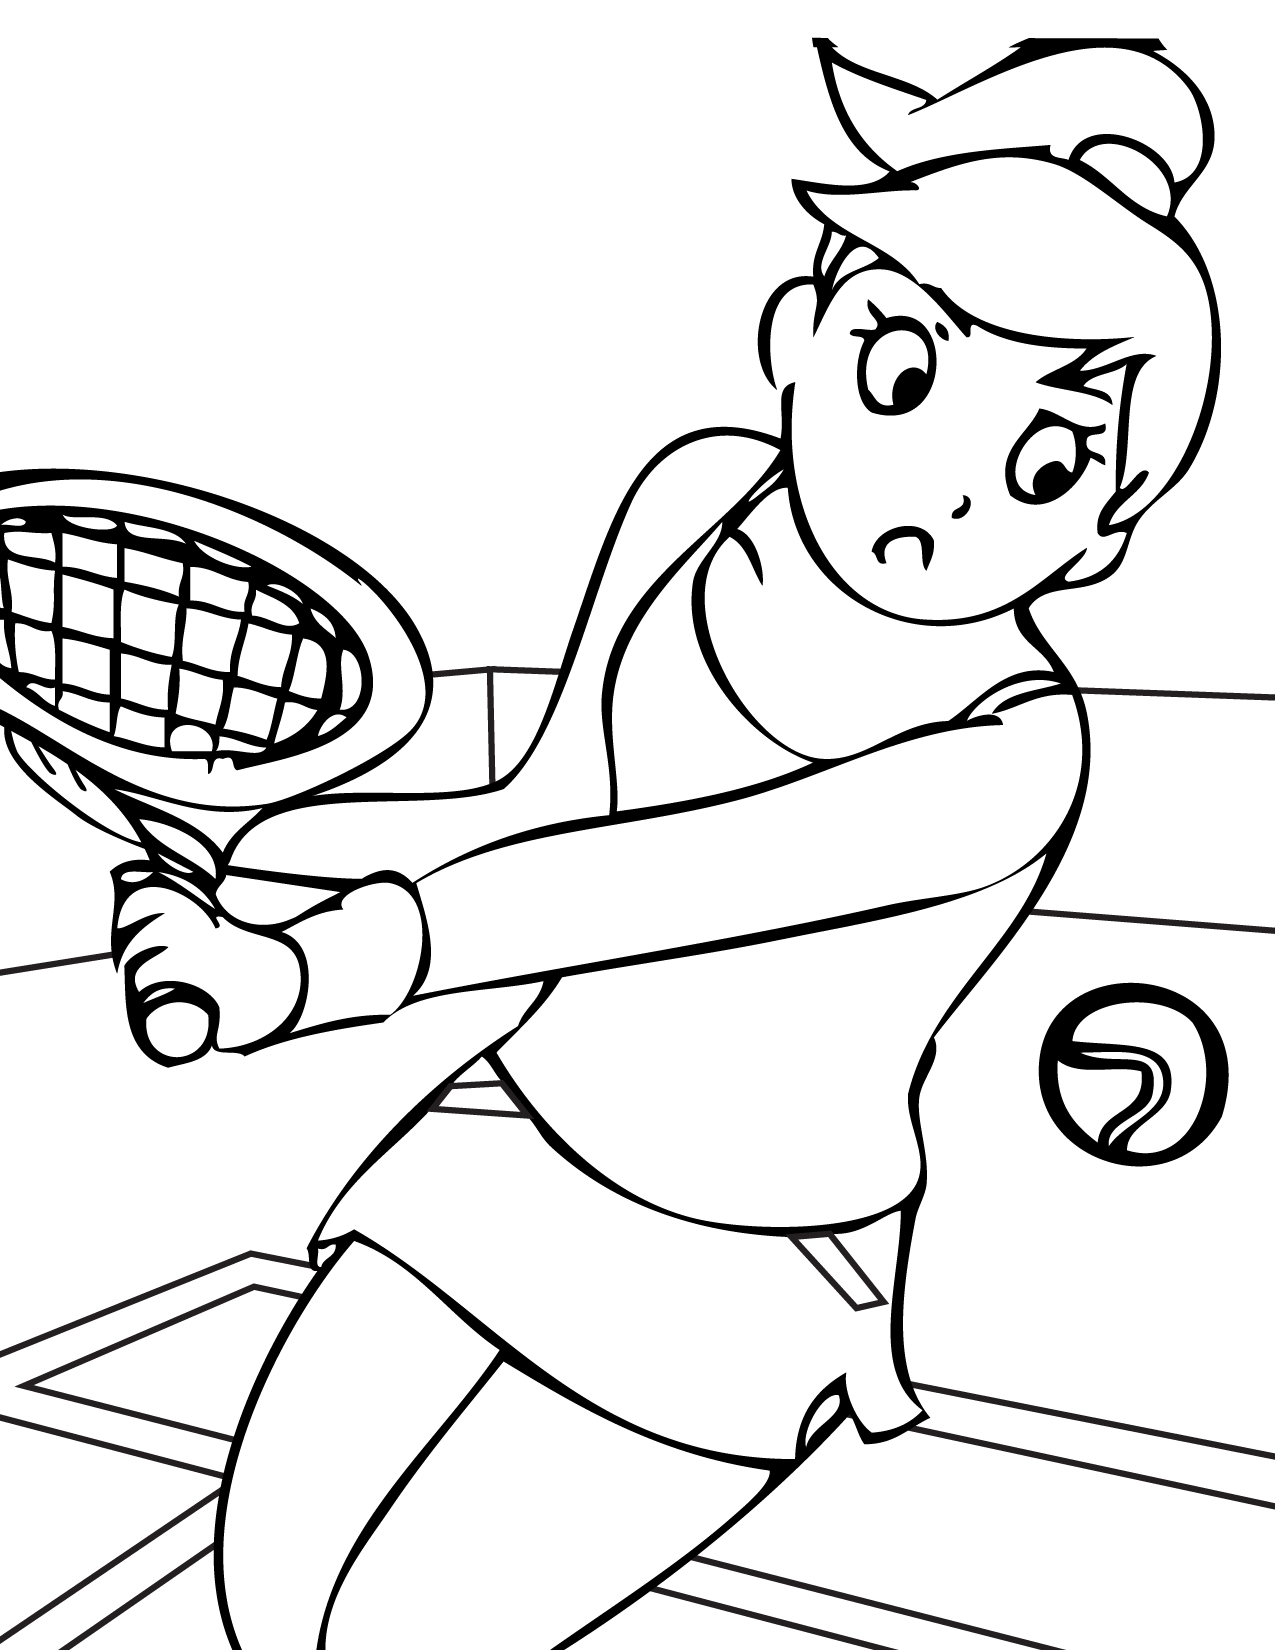  Training coloring pages | Girl training Tennis